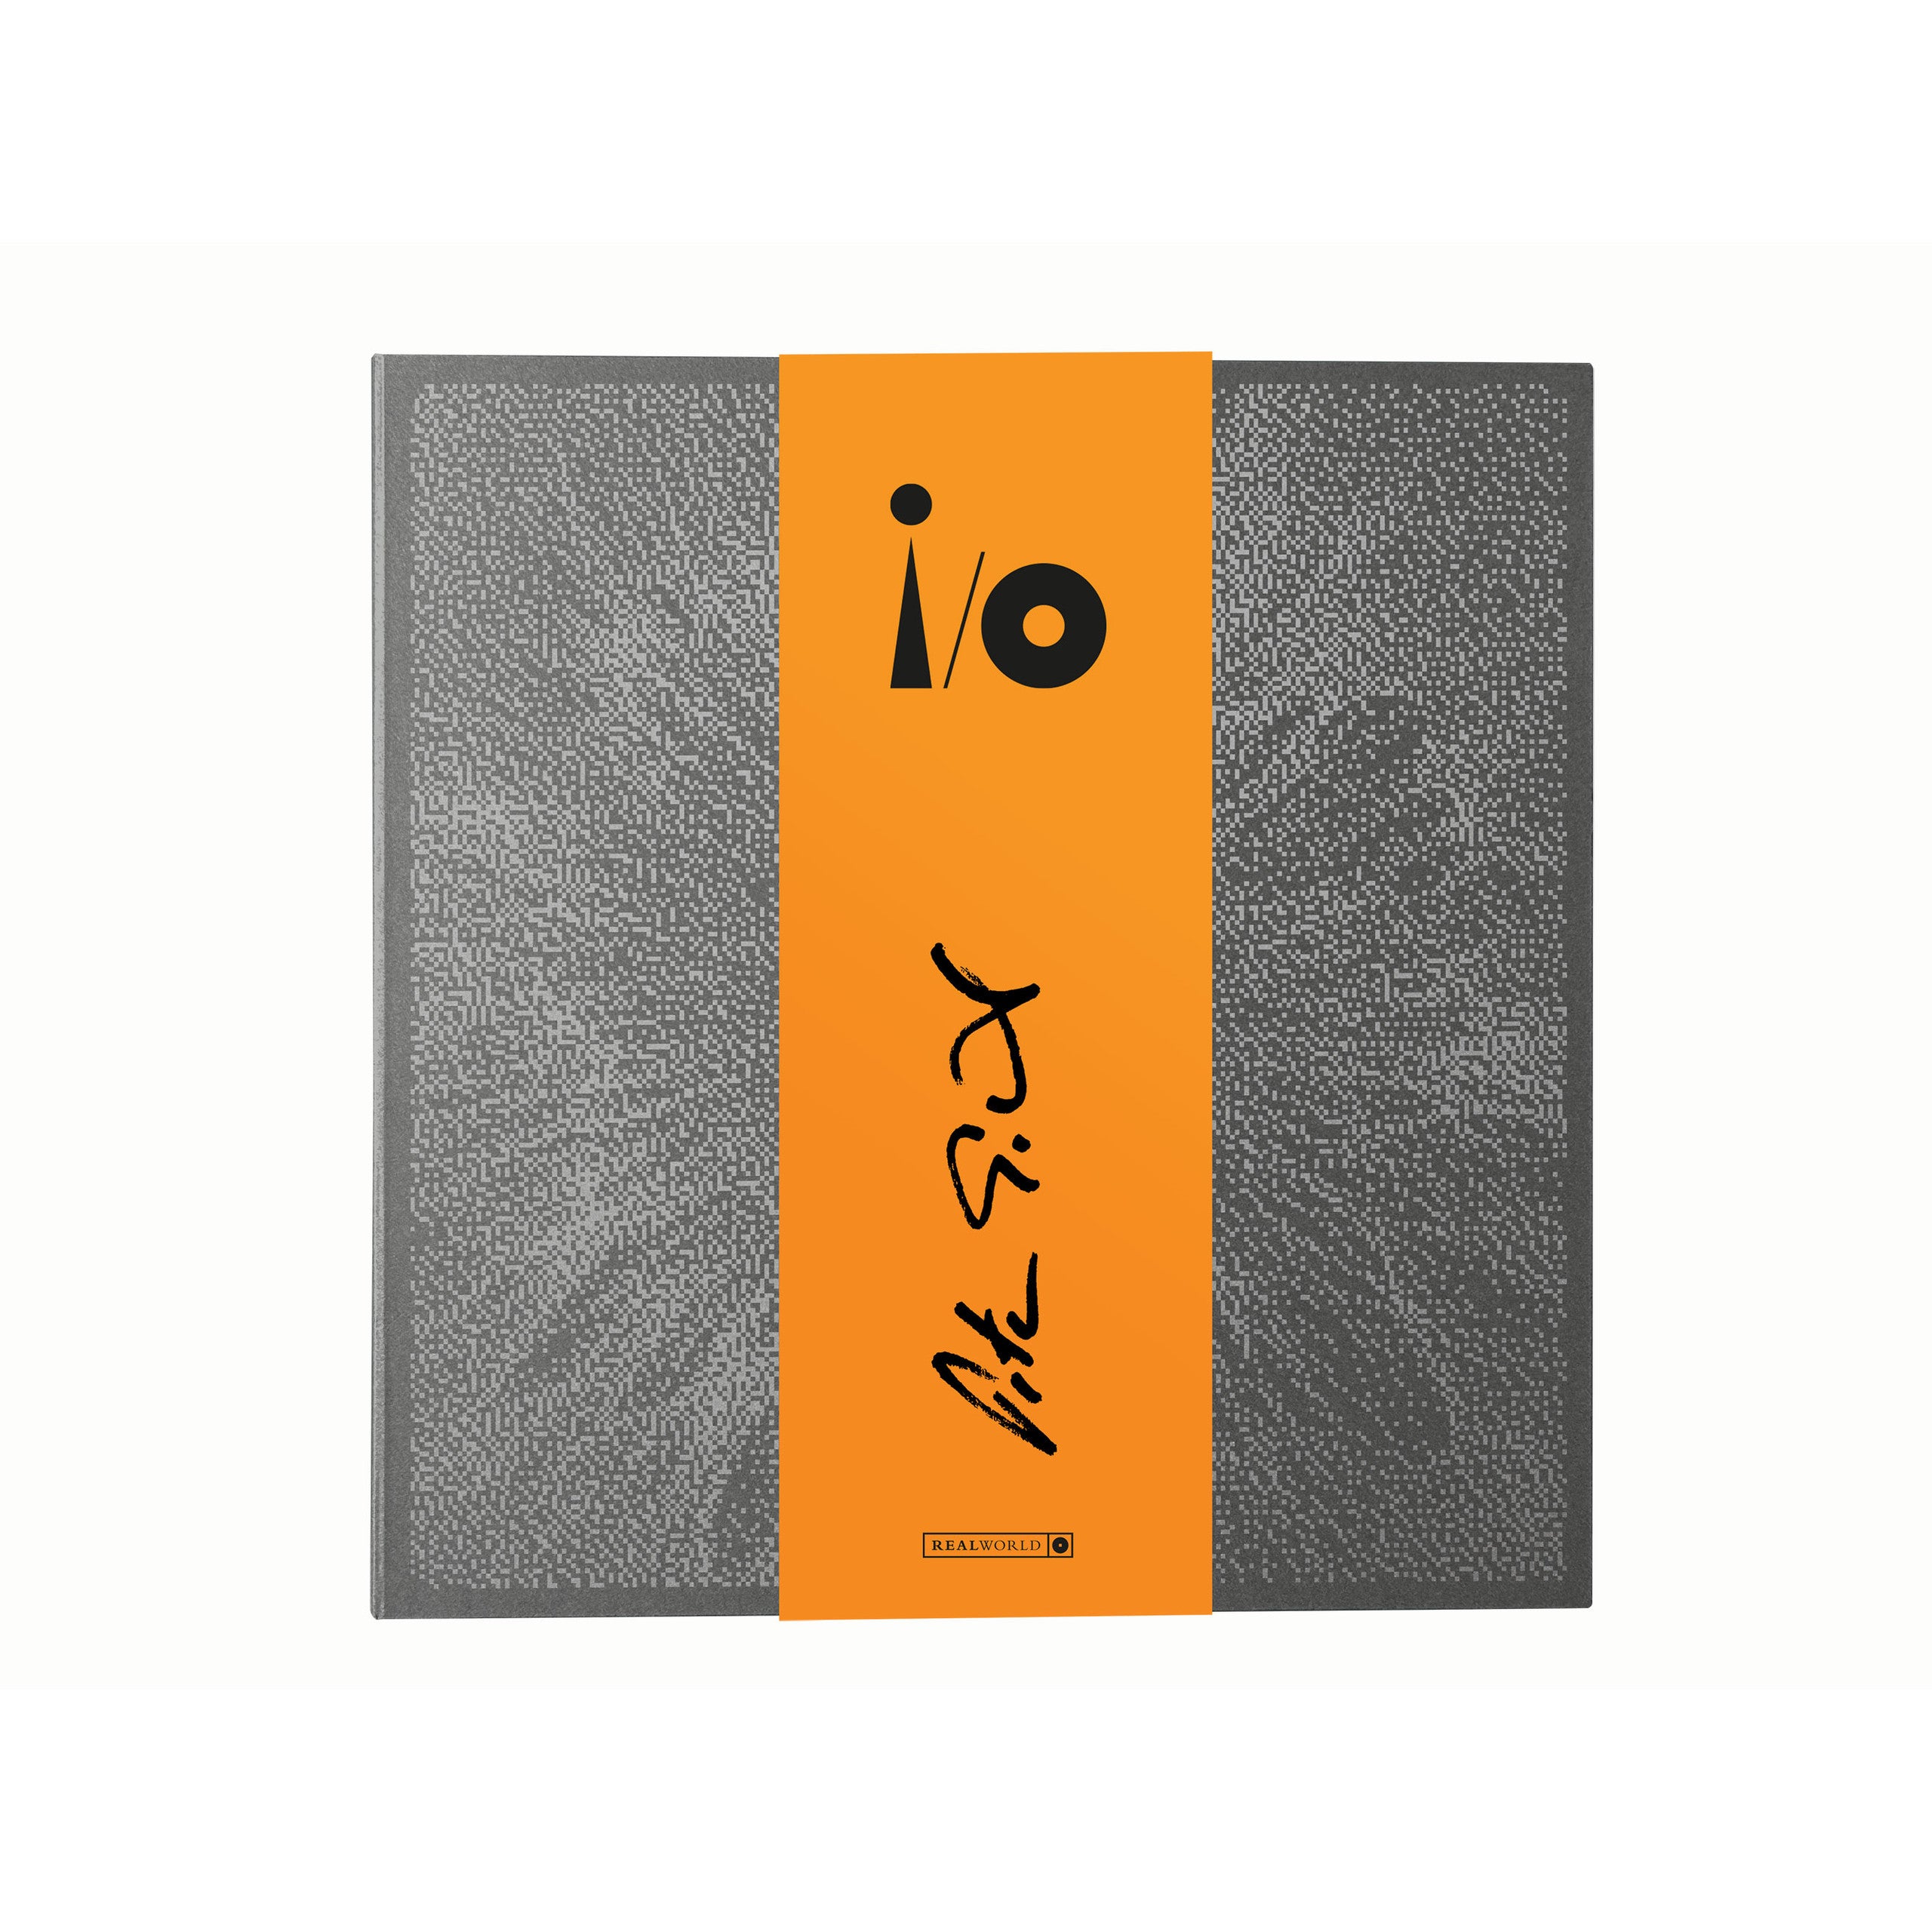 Order Peter Gabriel - i/o (4LP + 2CD + Blu-Ray Box Set, including Bright-Side, Dark-Side & In-Side Mixes)